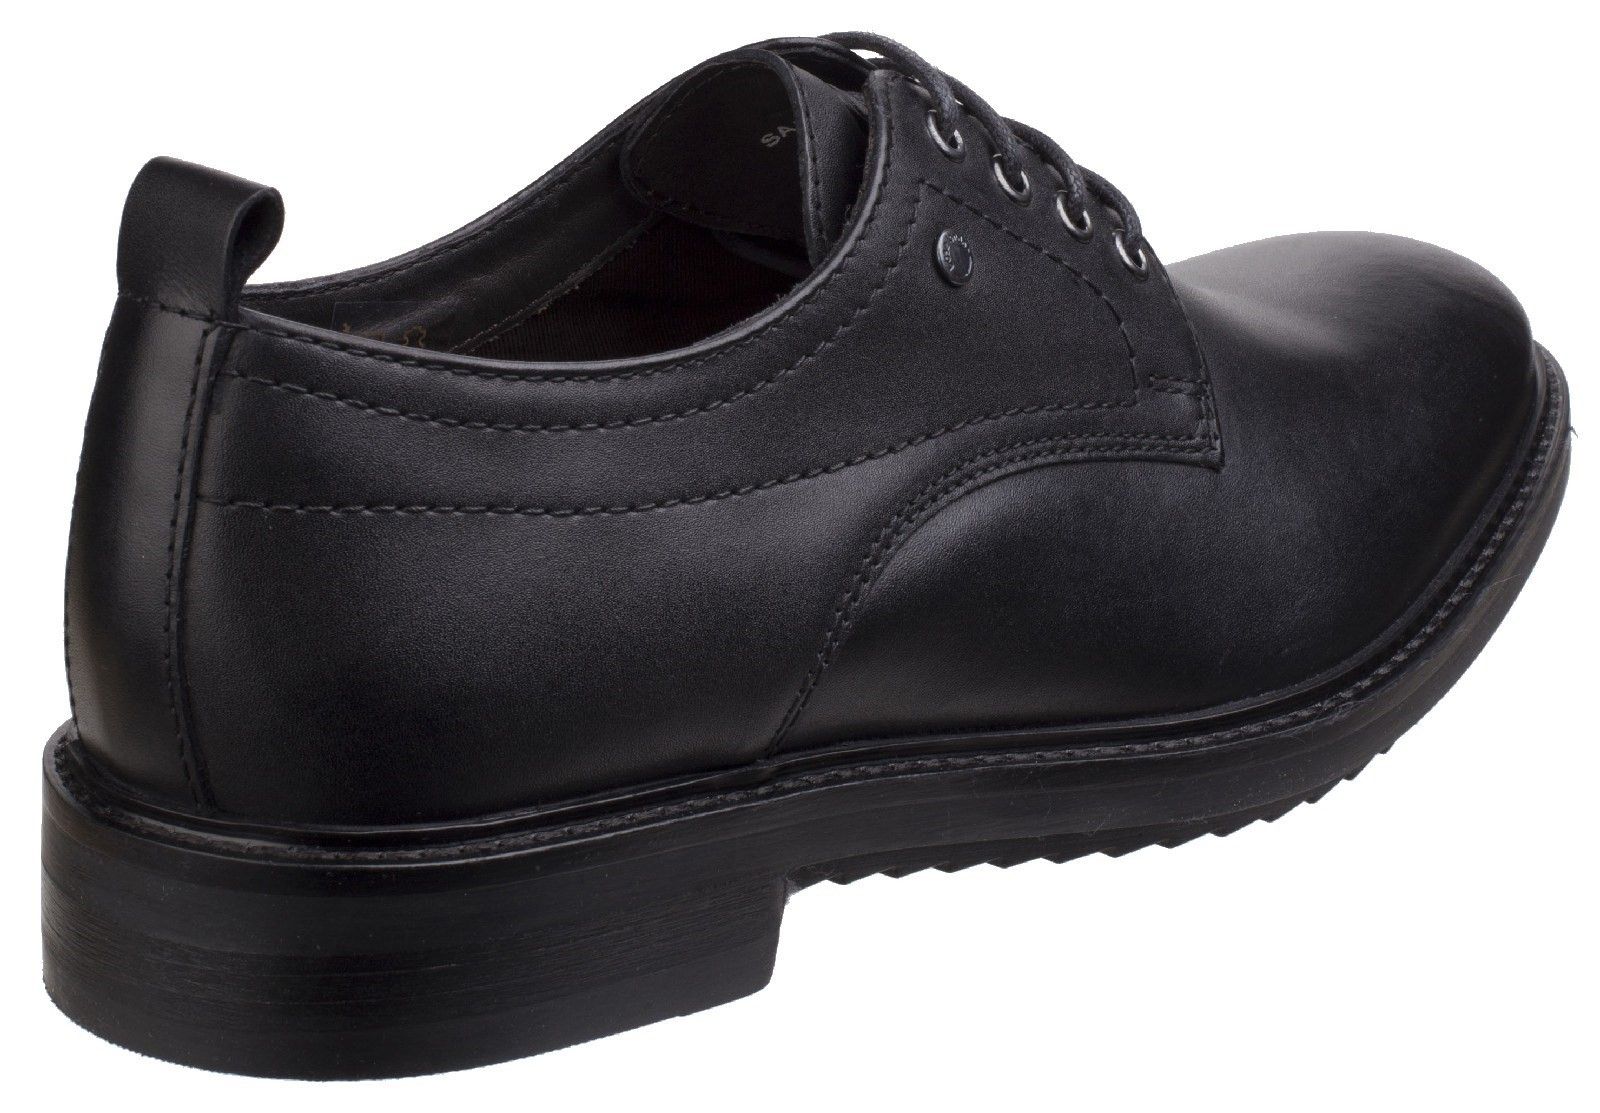 This Elba shoe style from the Actor Range, shows off a smooth leather upper, tweaked with a metal stud detail, as well as the jagged, cleated sole - gives this style the edge on your classic formal. High quality waxy leather with deep shine. 
High quality leather lining.